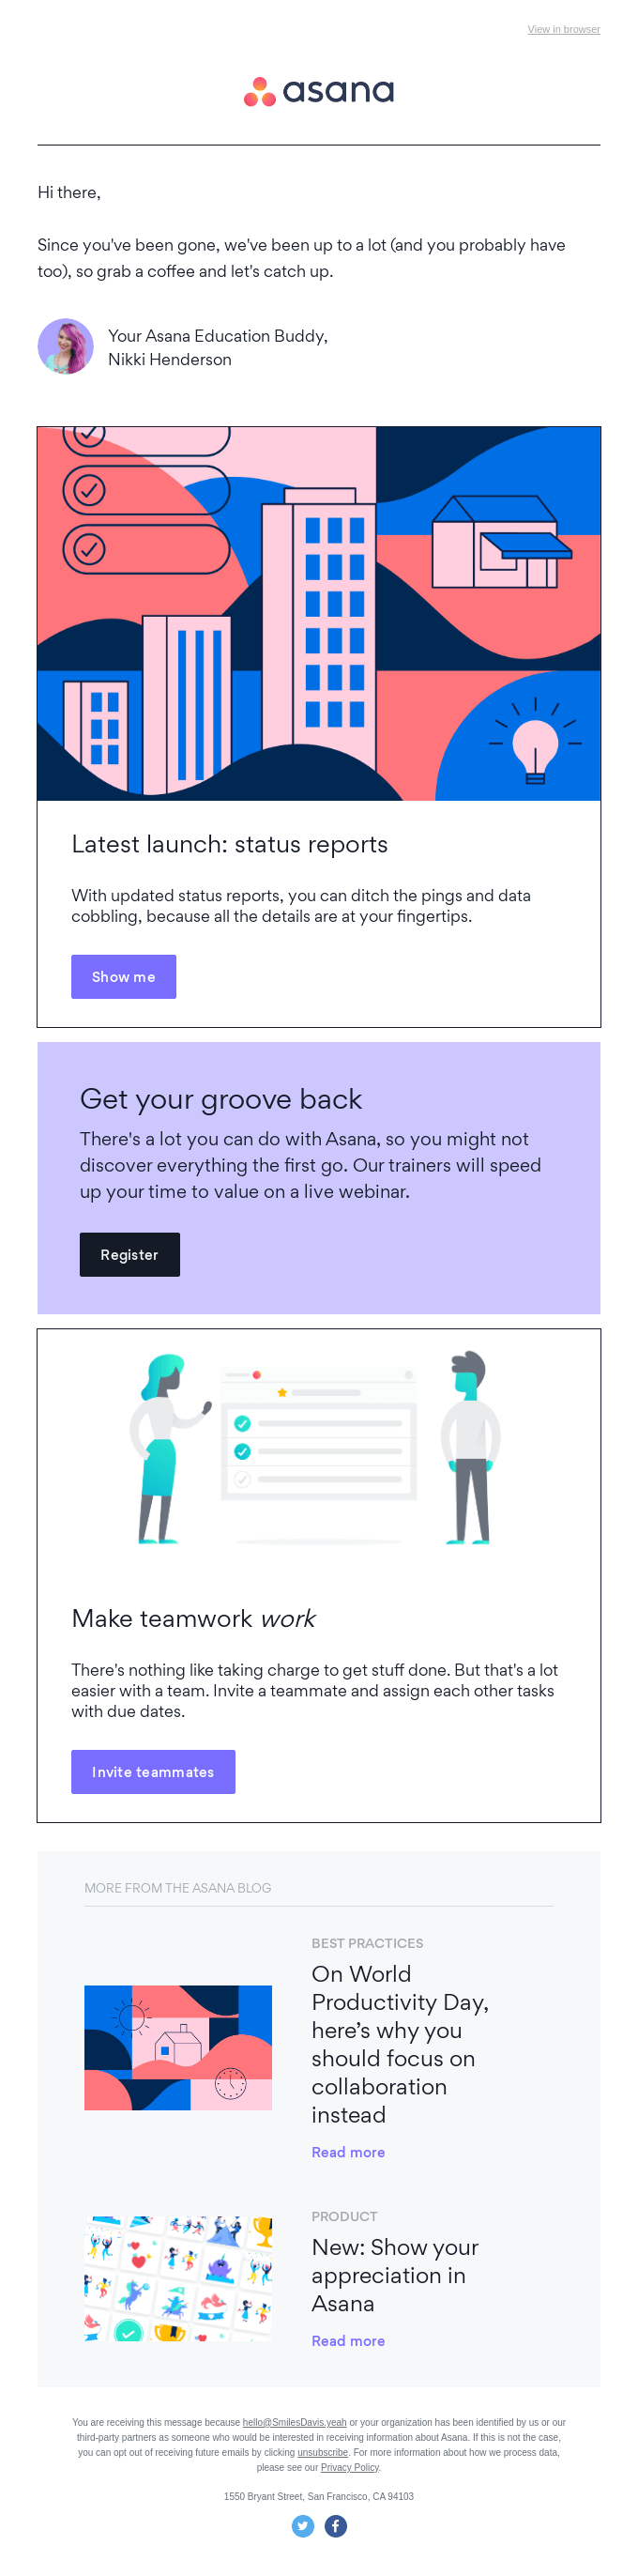 Welcome back! - Asana Email Newsletter